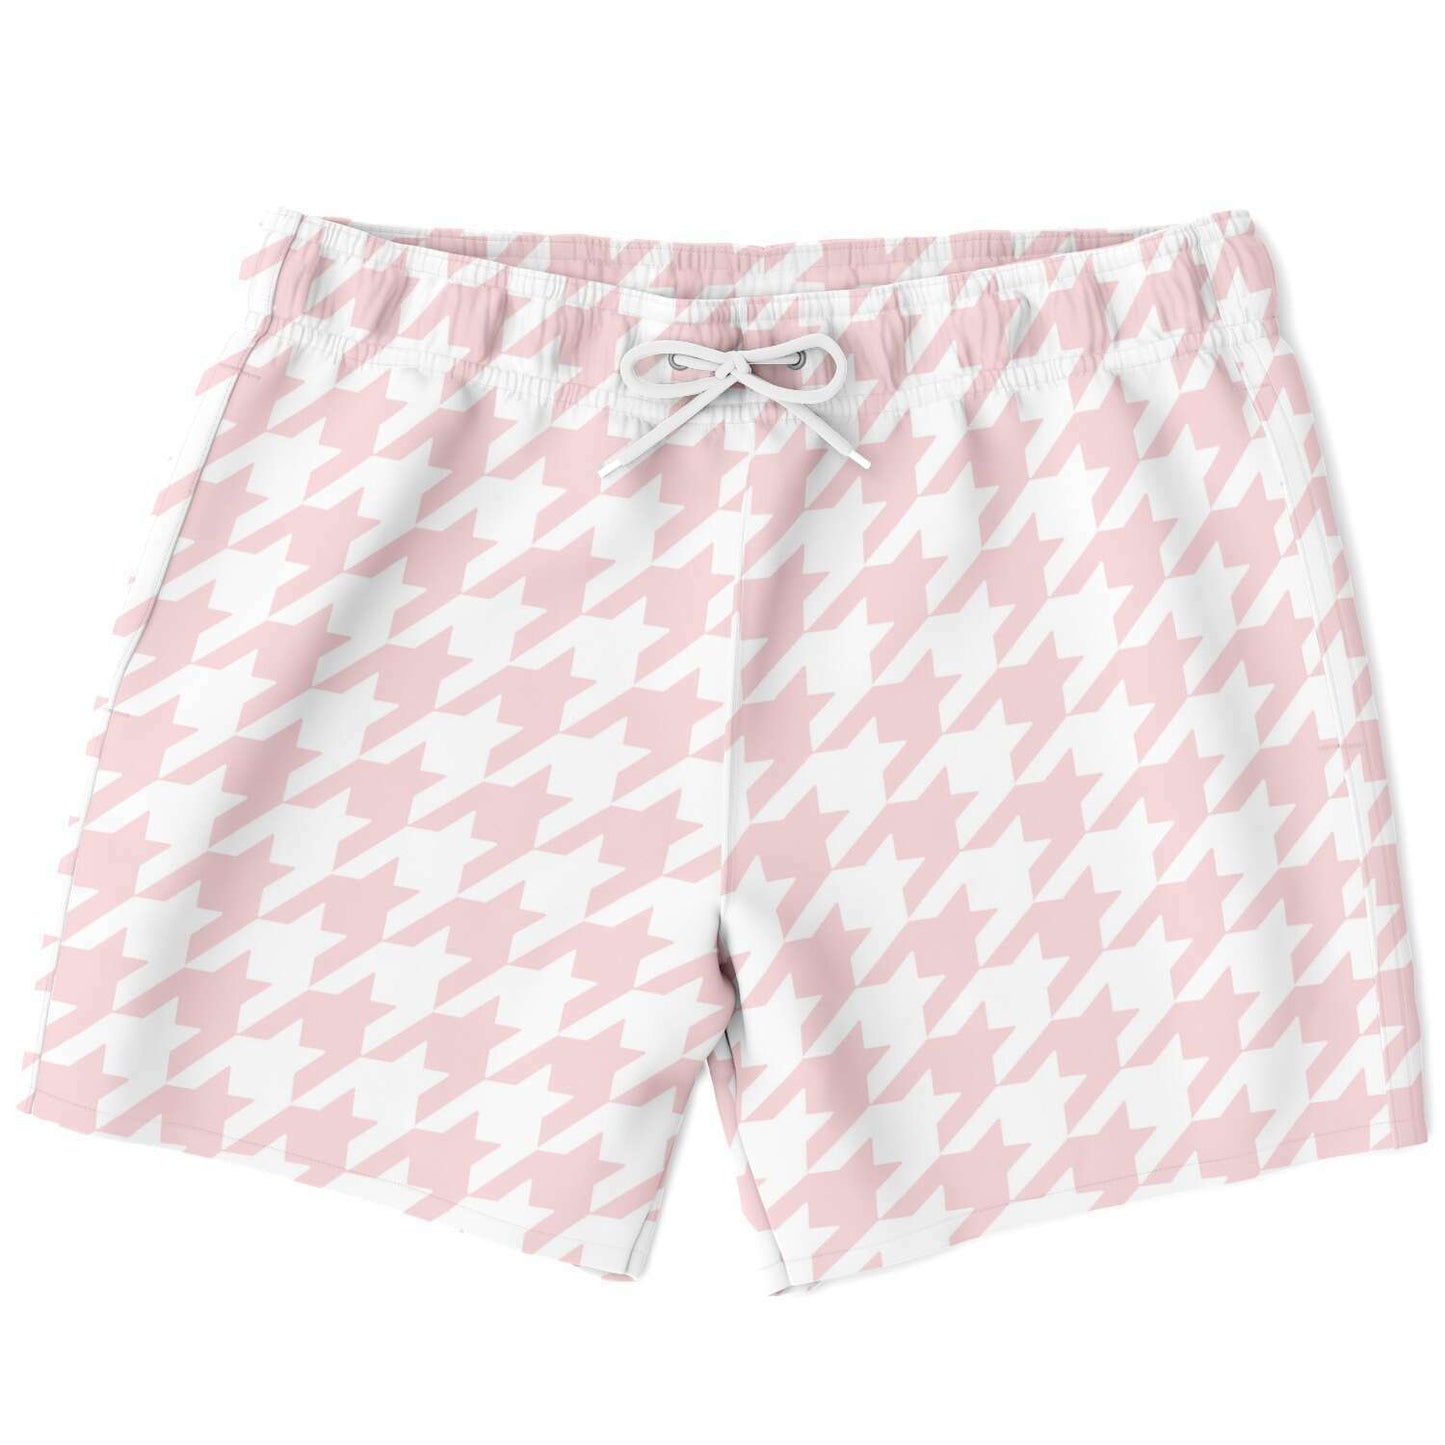 Pale Pink Houndstooth Swim Shorts